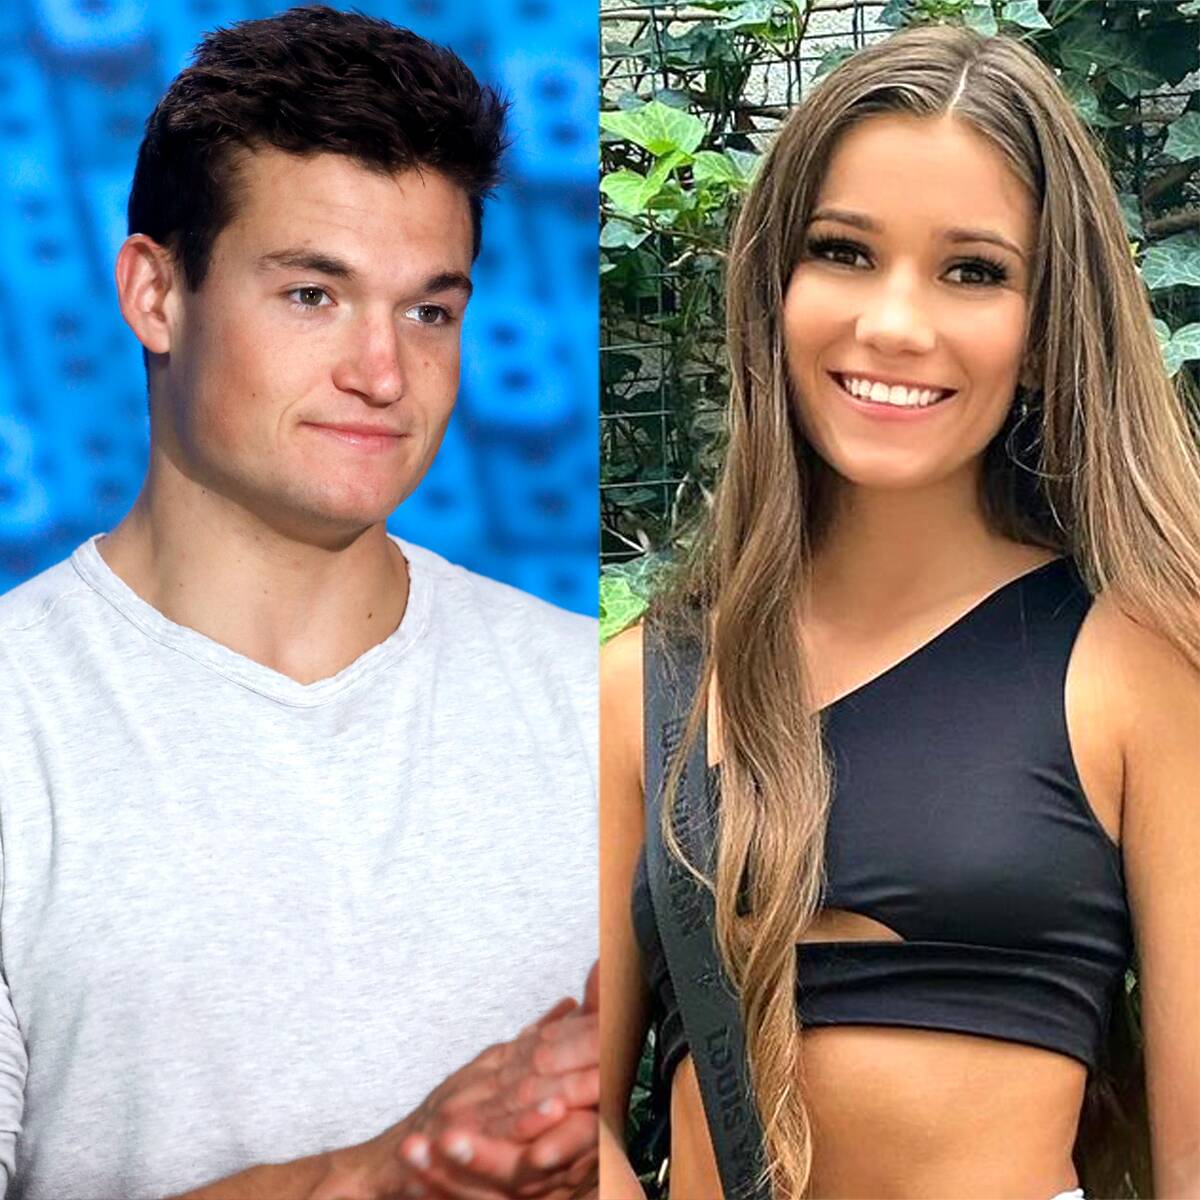 Cheer's Morgan Simianer and Big Brother's Jackson Michie Break Up